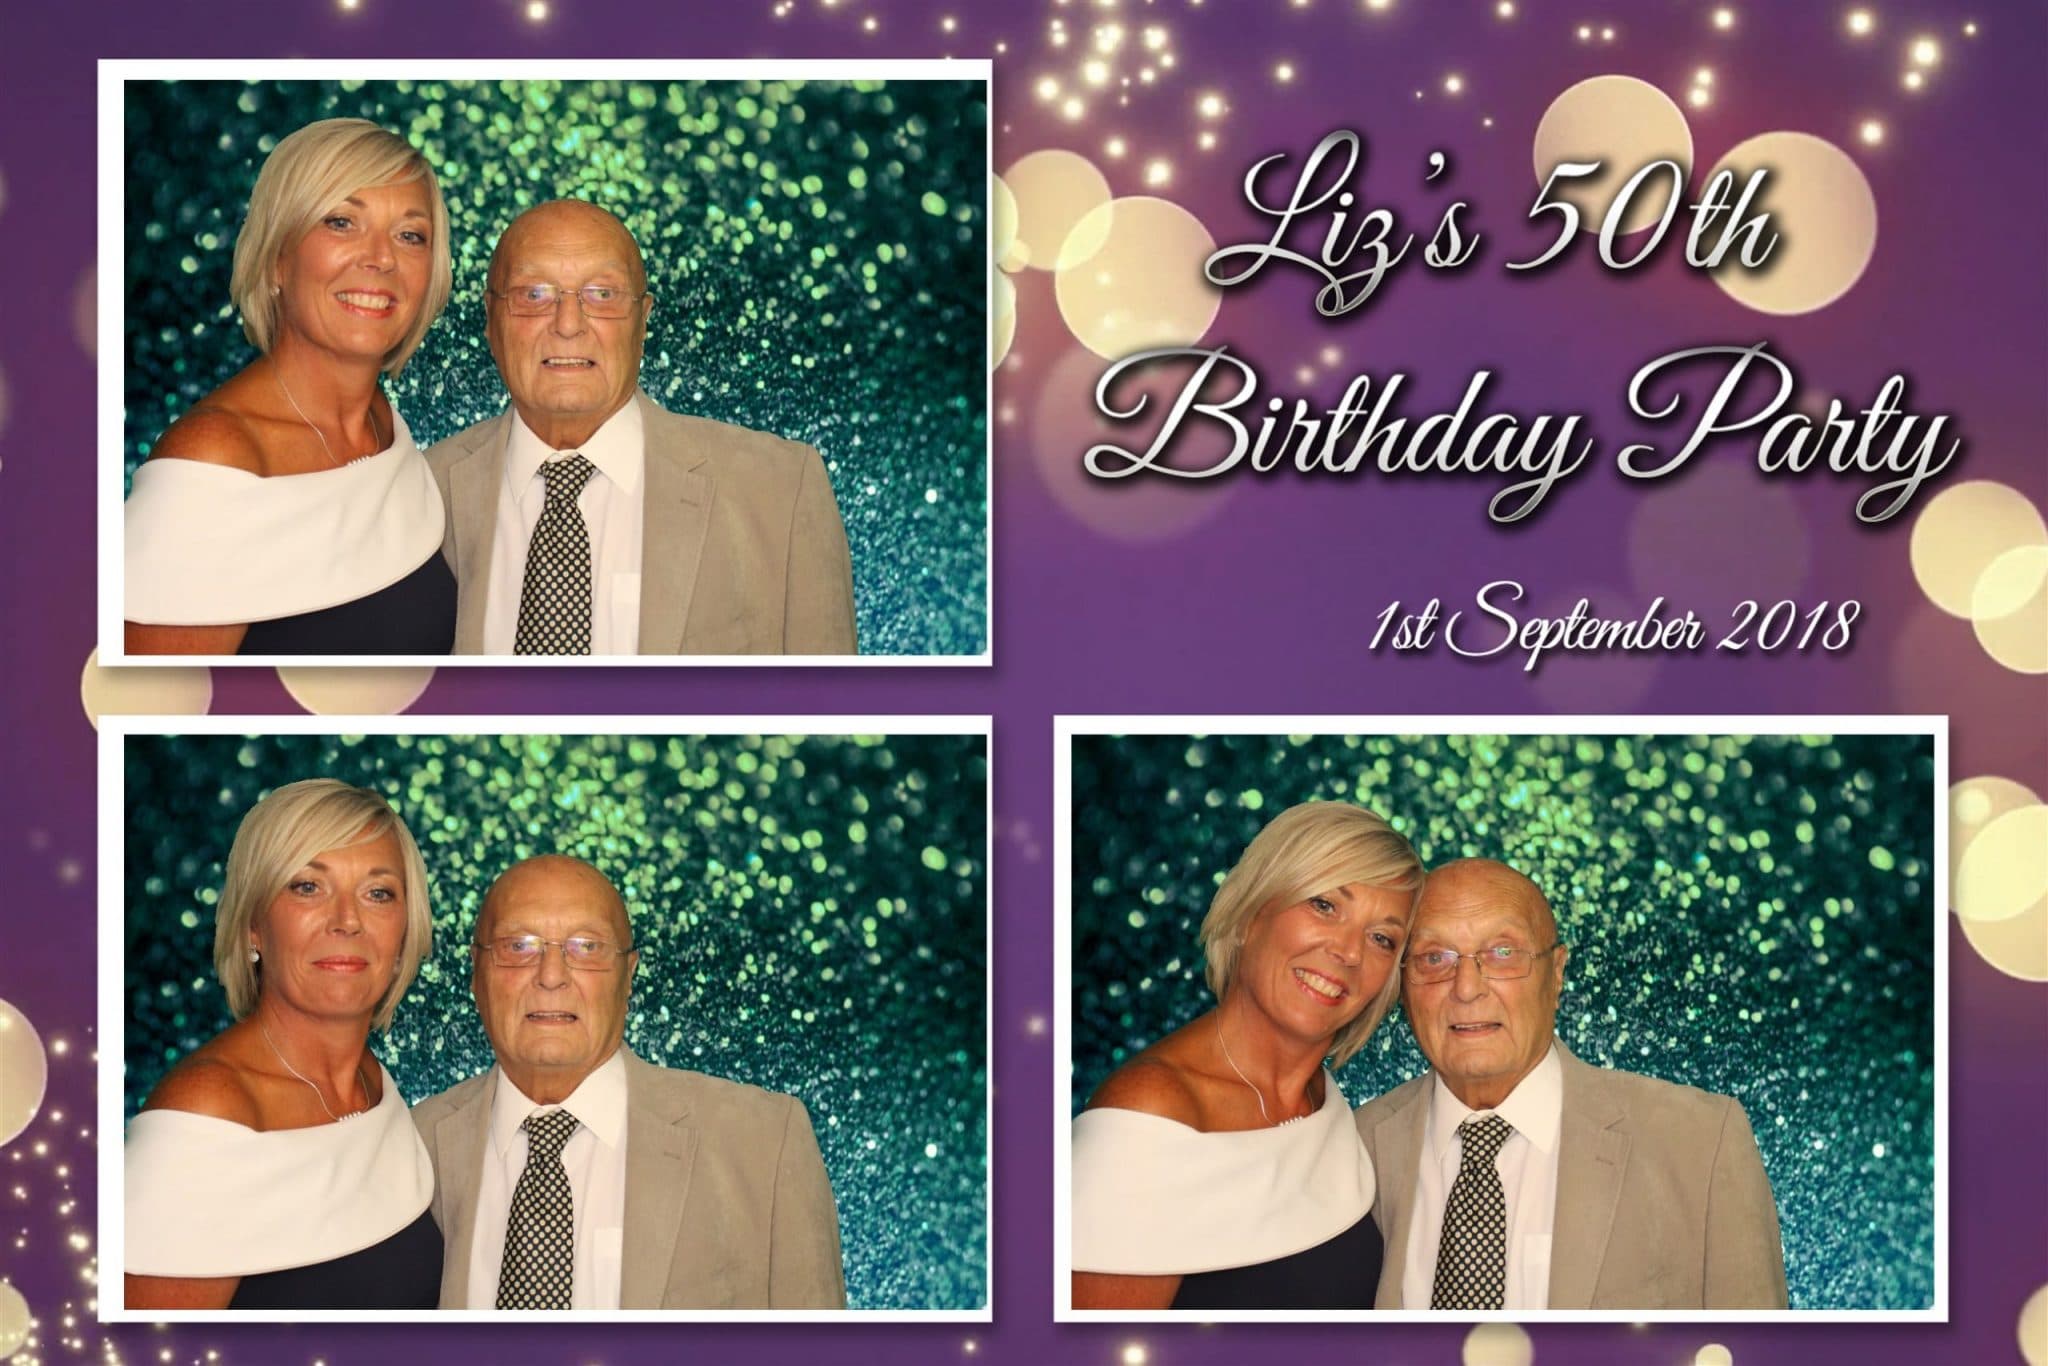 Party Photo Booth hire Birmingham Print from Liz's 50th Birthday